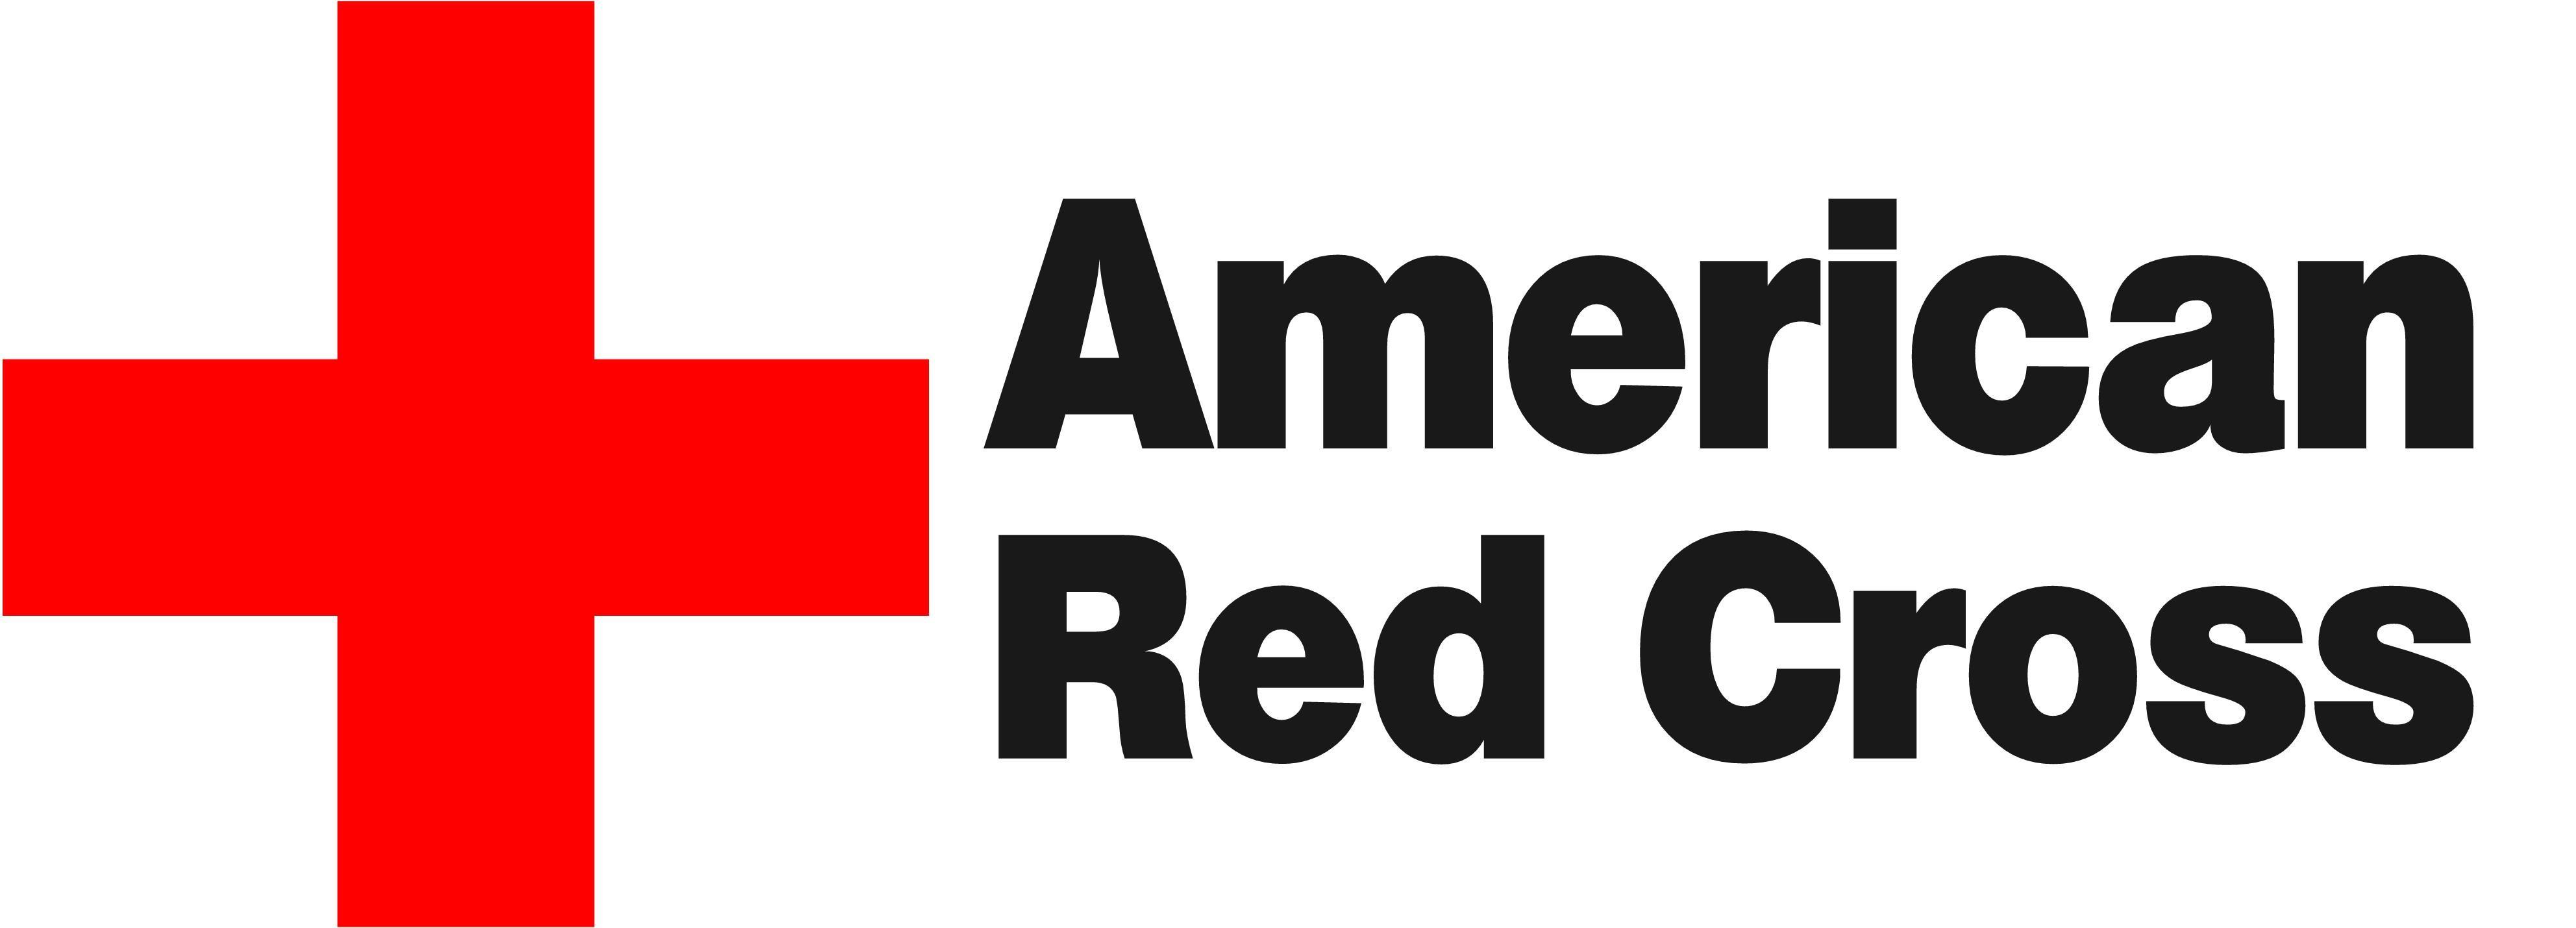 Red Cross Blood Donation Logo - The Next Red Cross Blood Drive at Good SAM